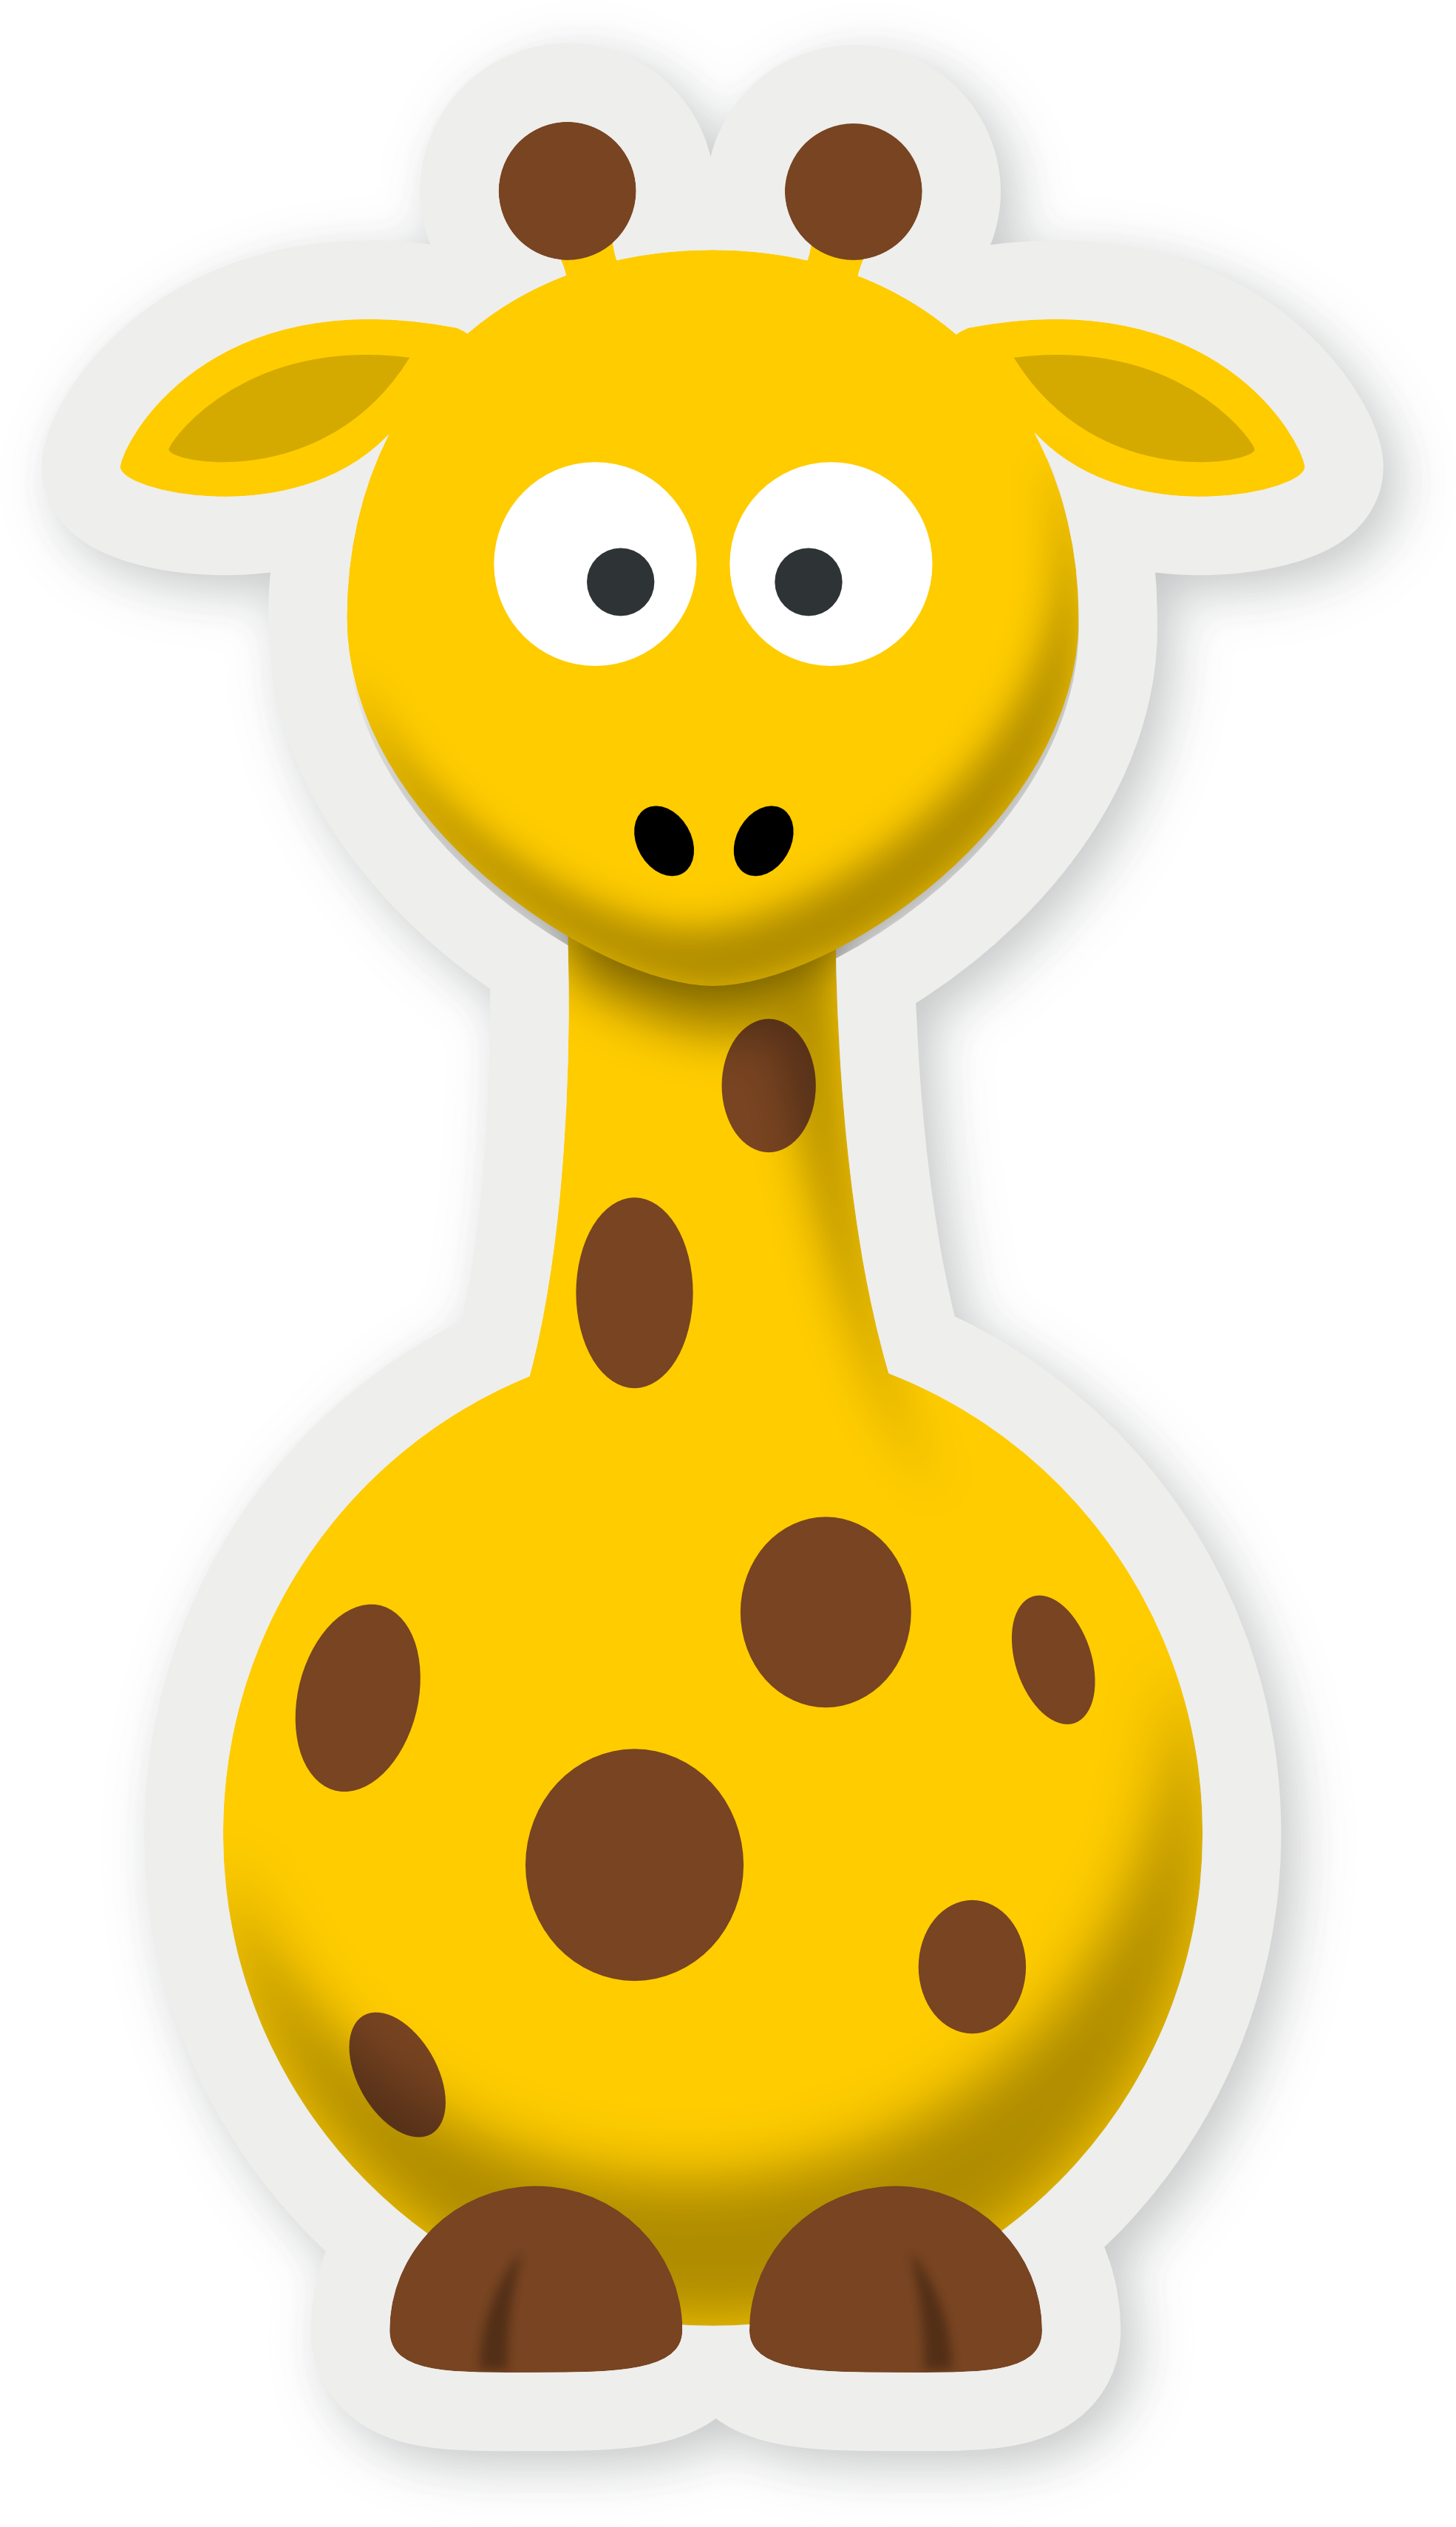 Portable Network Graphics Clip art Transparency Northern giraffe Image ...